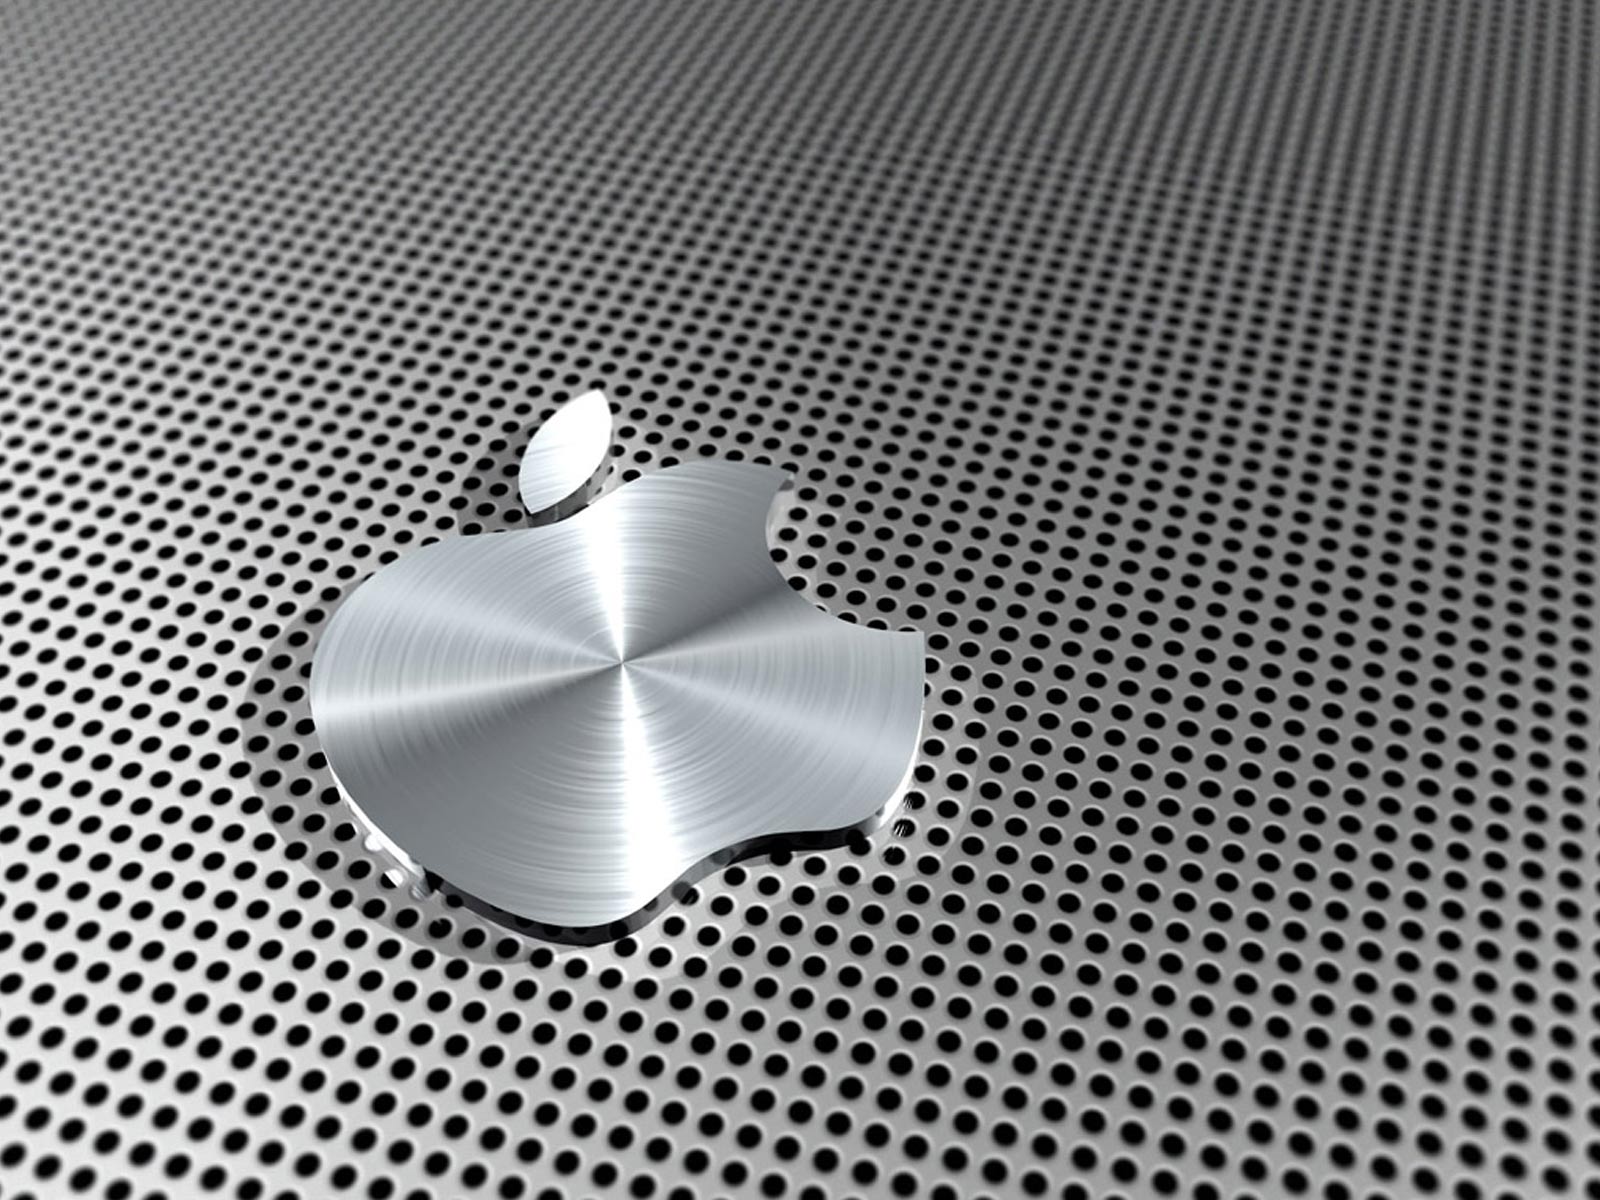 Apple 3d Chrome Art Laptop Wallpaper Here You Can See